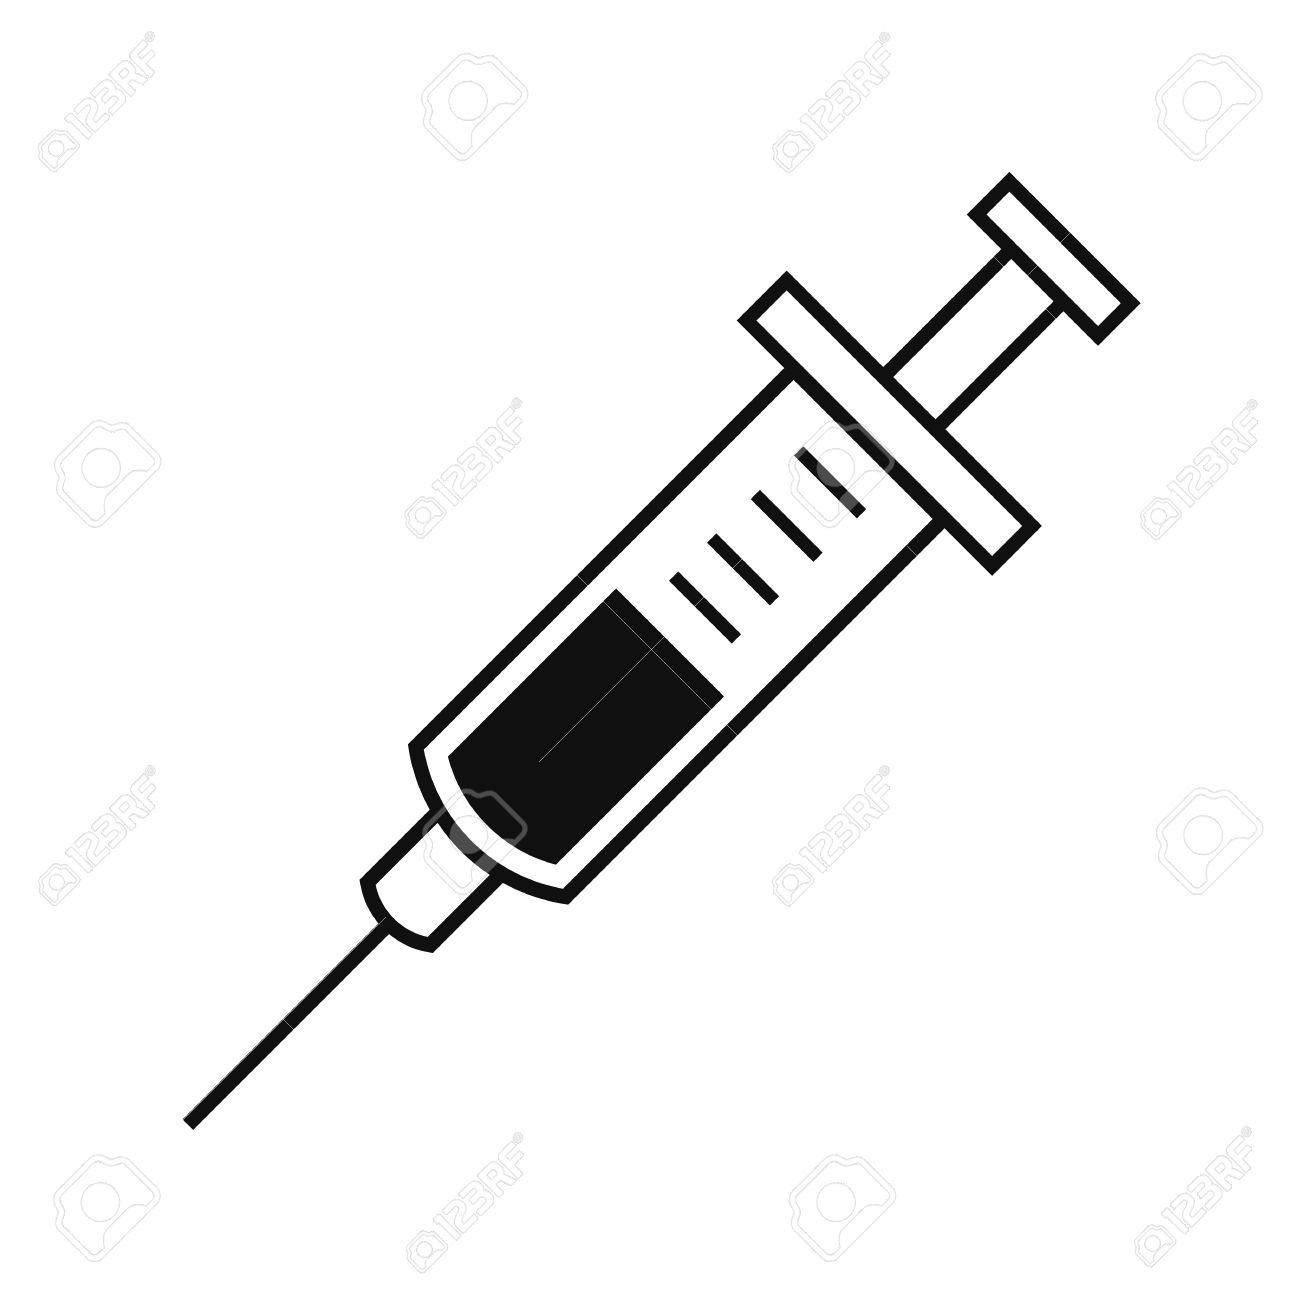 Injection clipart .